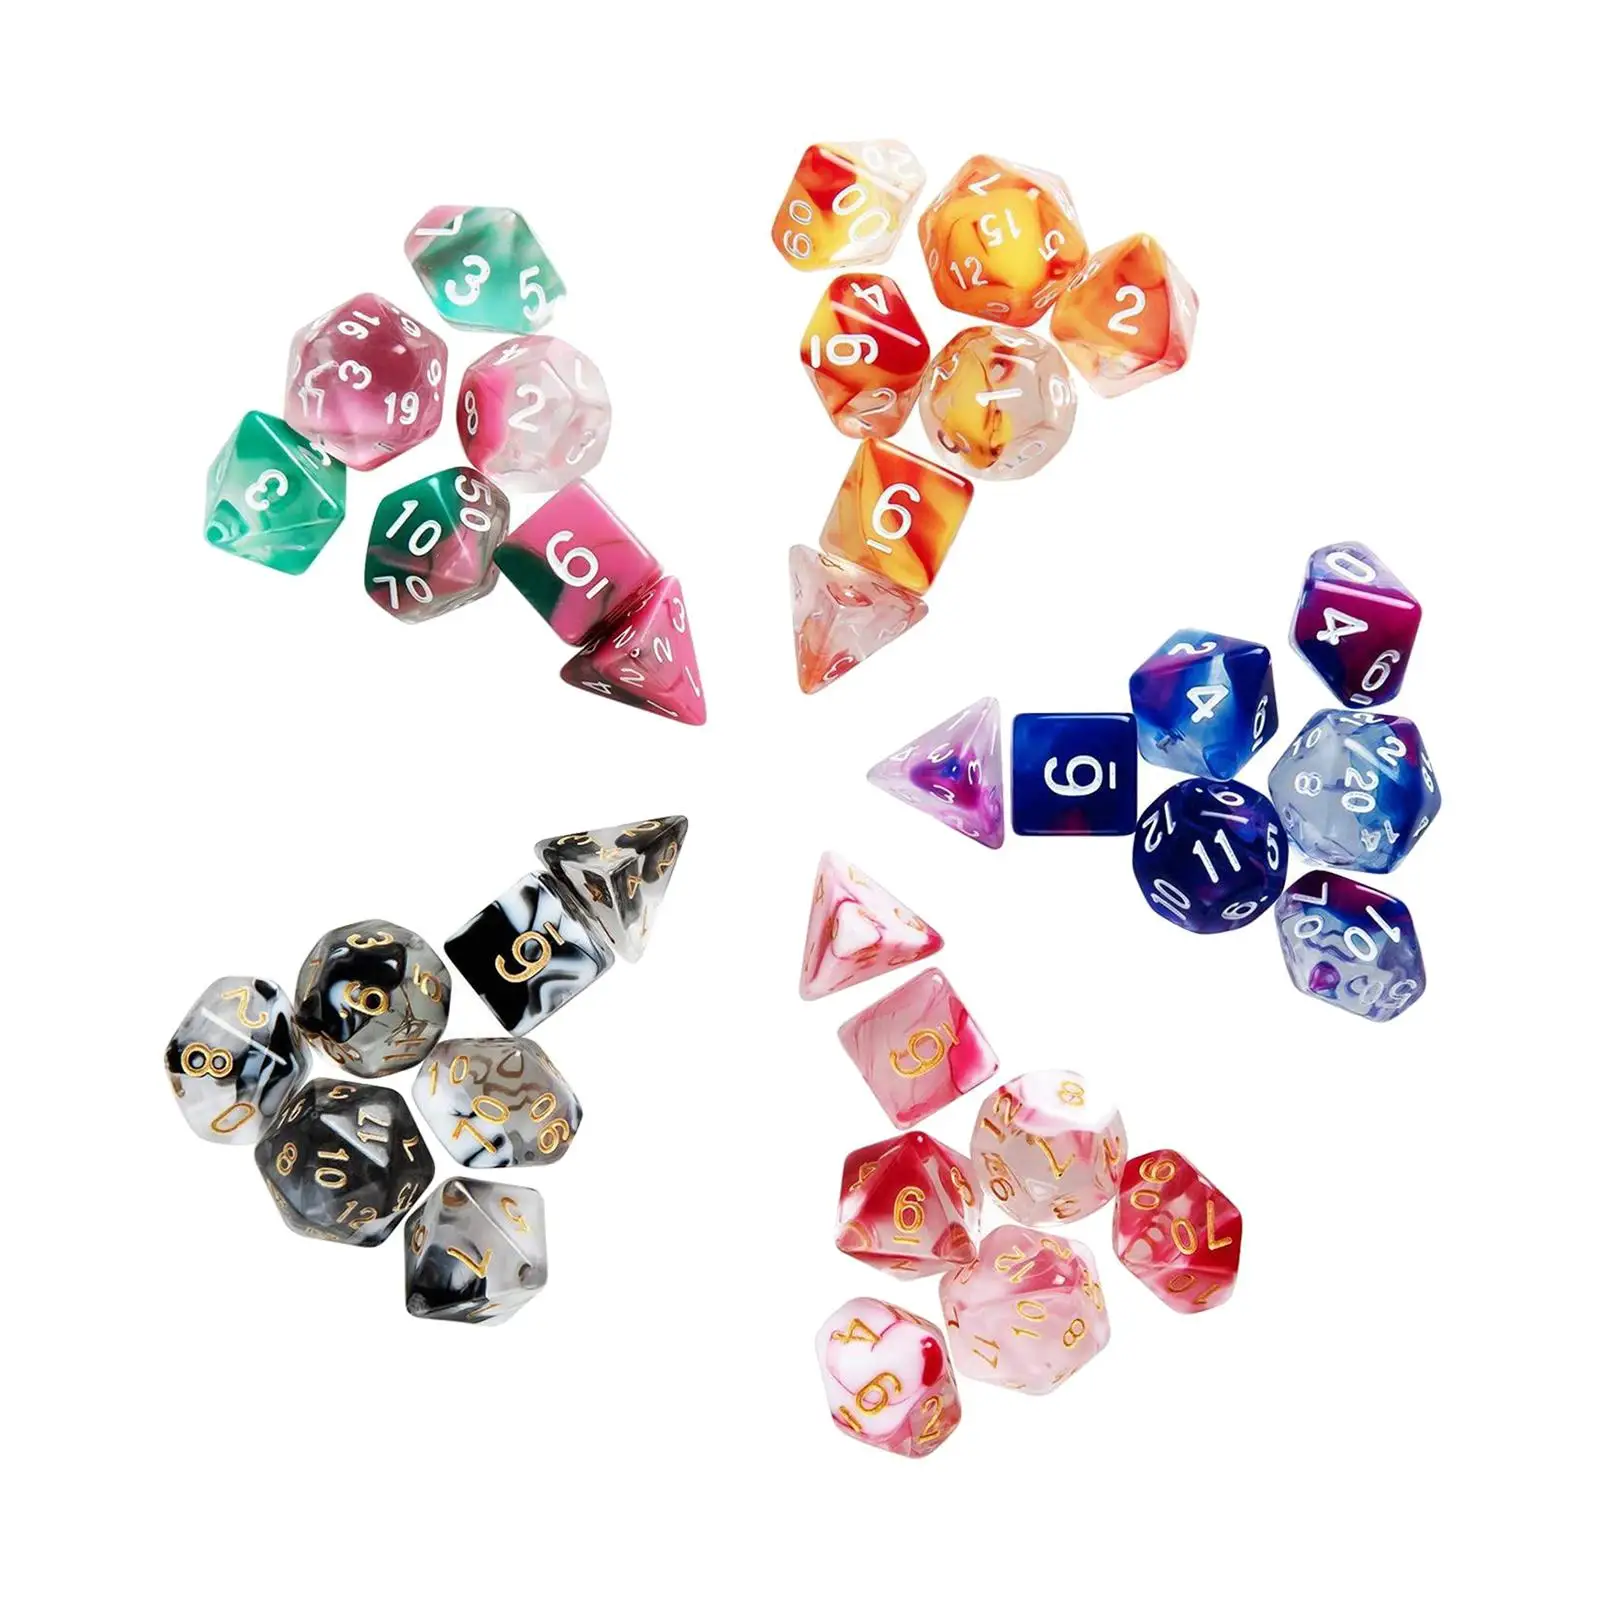 35 Pieces Acrylic Polyhedral Dices Set D4 D8 D10 D12 D20 Bar Toys Entertainment Toys for Card Games RPG Board Game